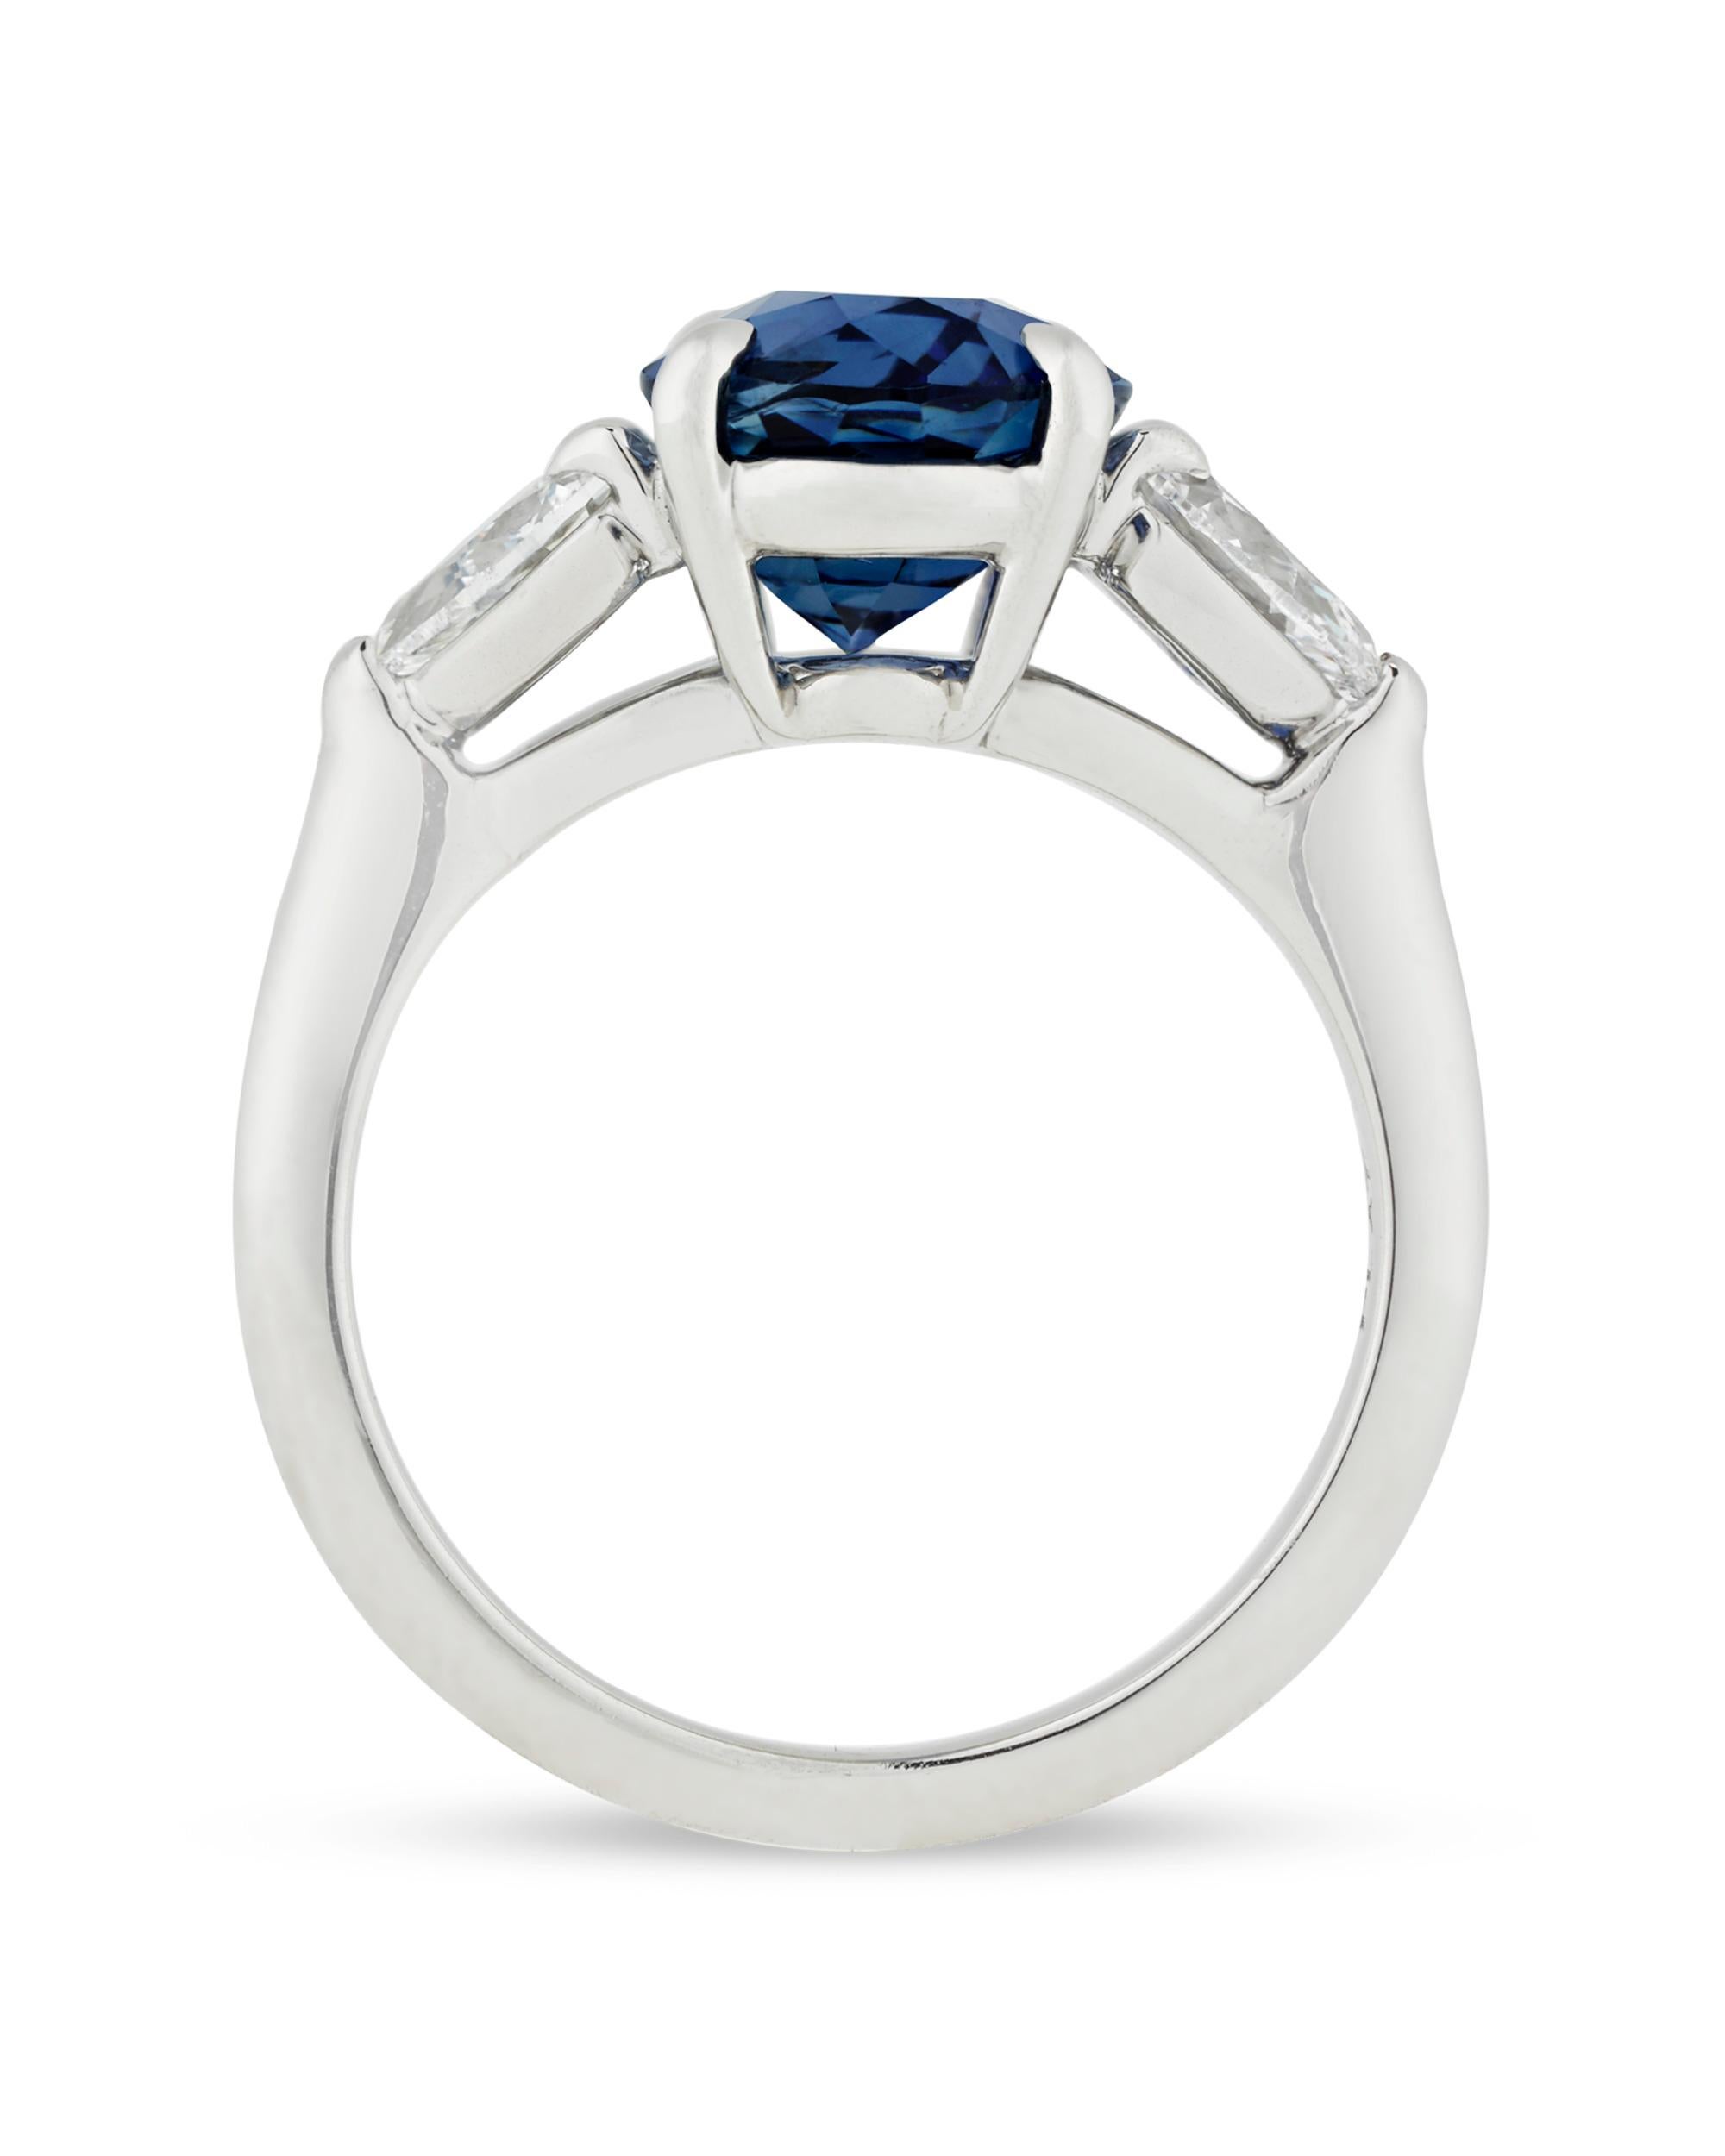 A regal, royal-blue sapphire is at the heart of this timeless ring. Weighing 3.90 carats, this elegant jewel possesses even color distribution and rich saturation, characteristics of high-quality colored gemstones. White diamonds totaling 0.78